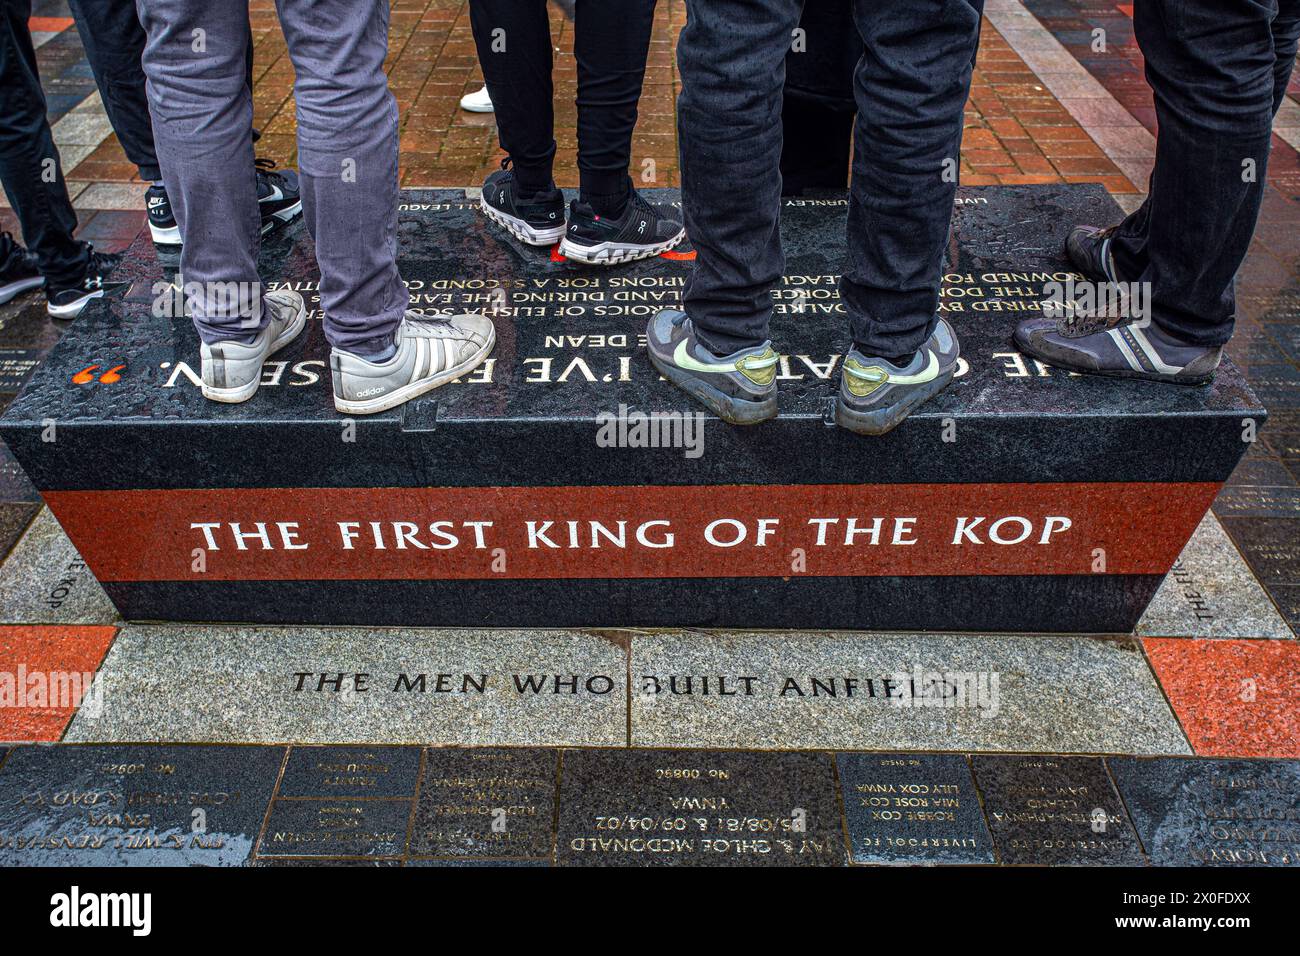 Liverpool football  club supporters ,fans standing on memorial floor L.F.C PlaqueThe first king of the Kop . Stock Photo